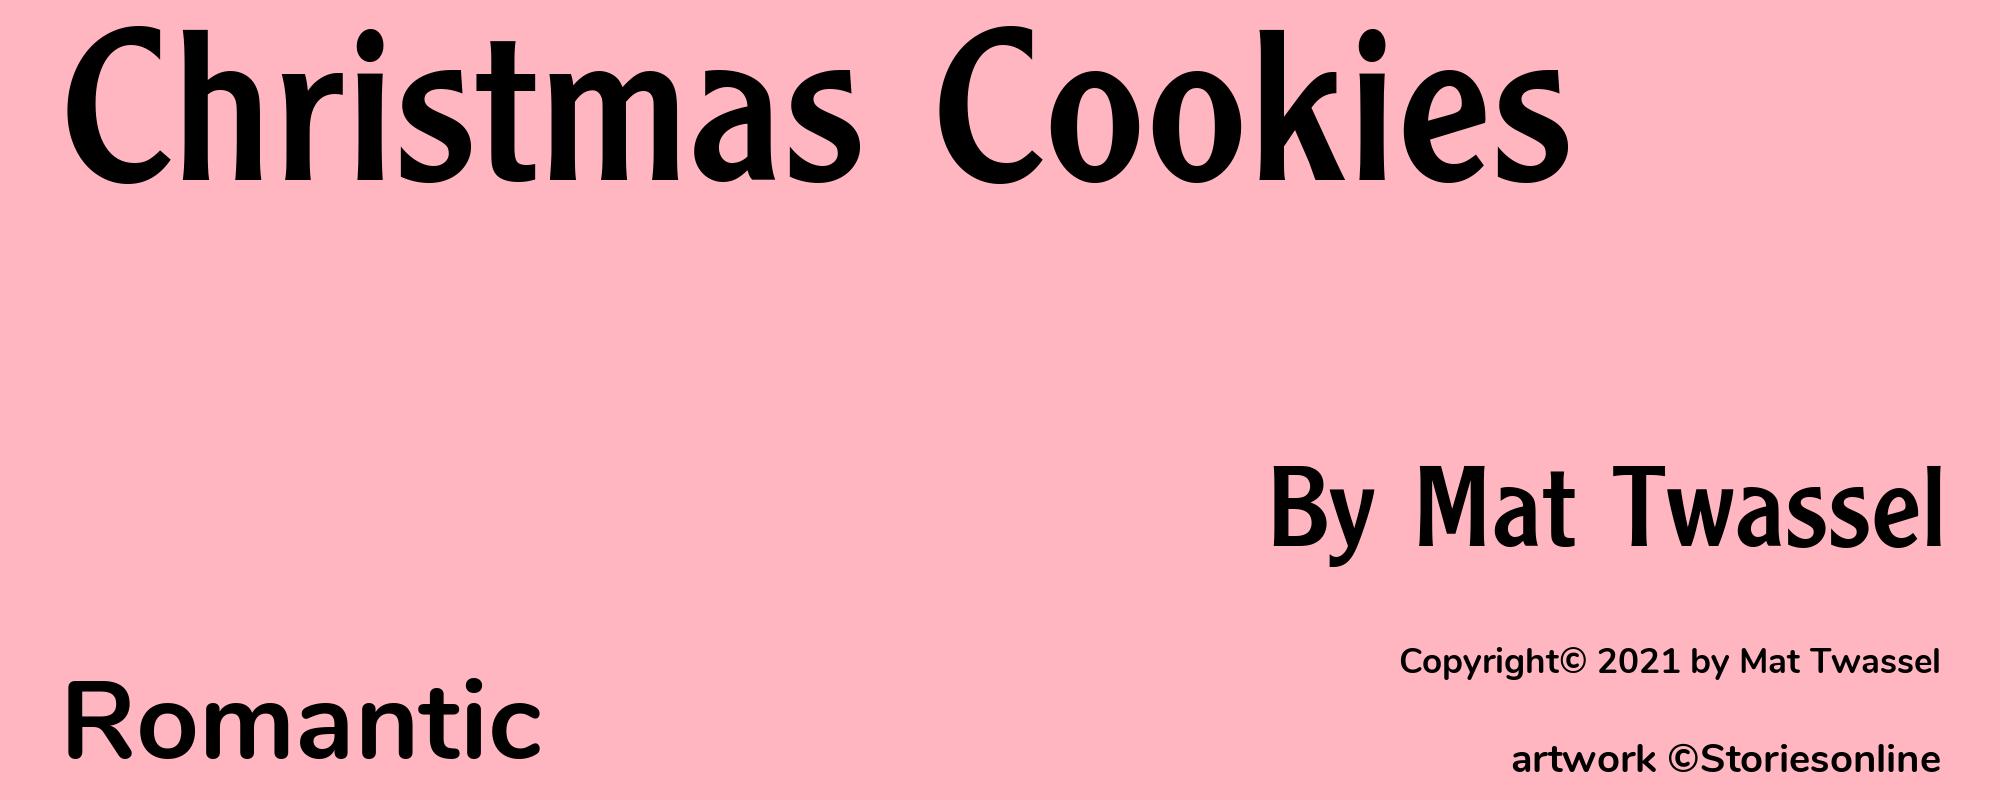 Christmas Cookies - Cover